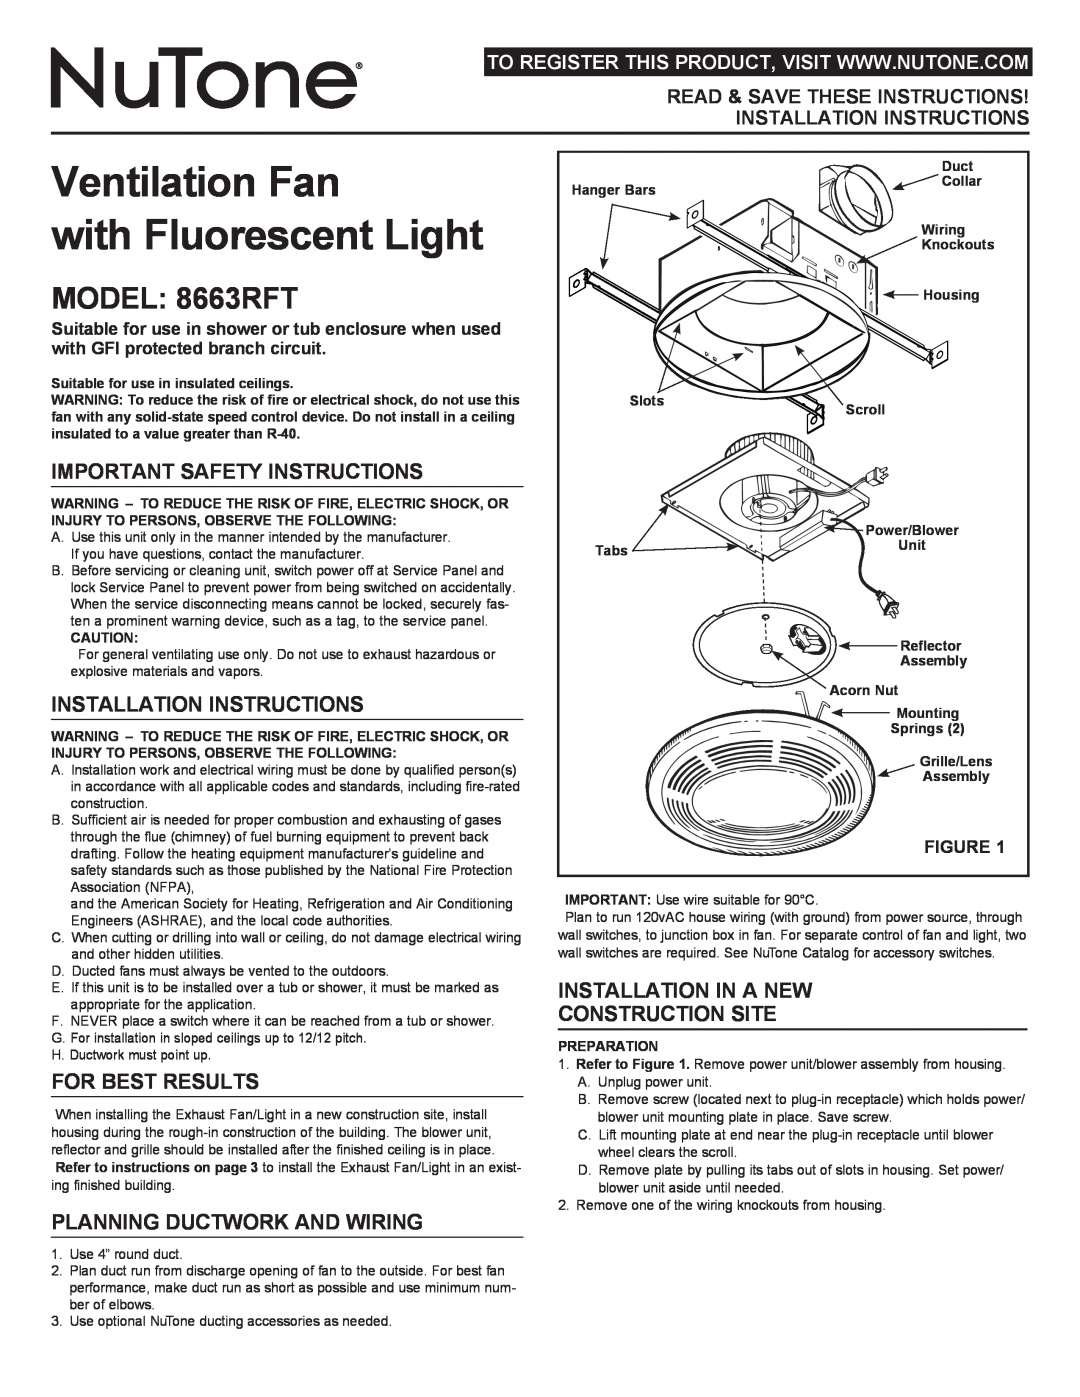 NuTone important safety instructions MODEL 8663RFT, Important Safety Instructions, Installation Instructions 